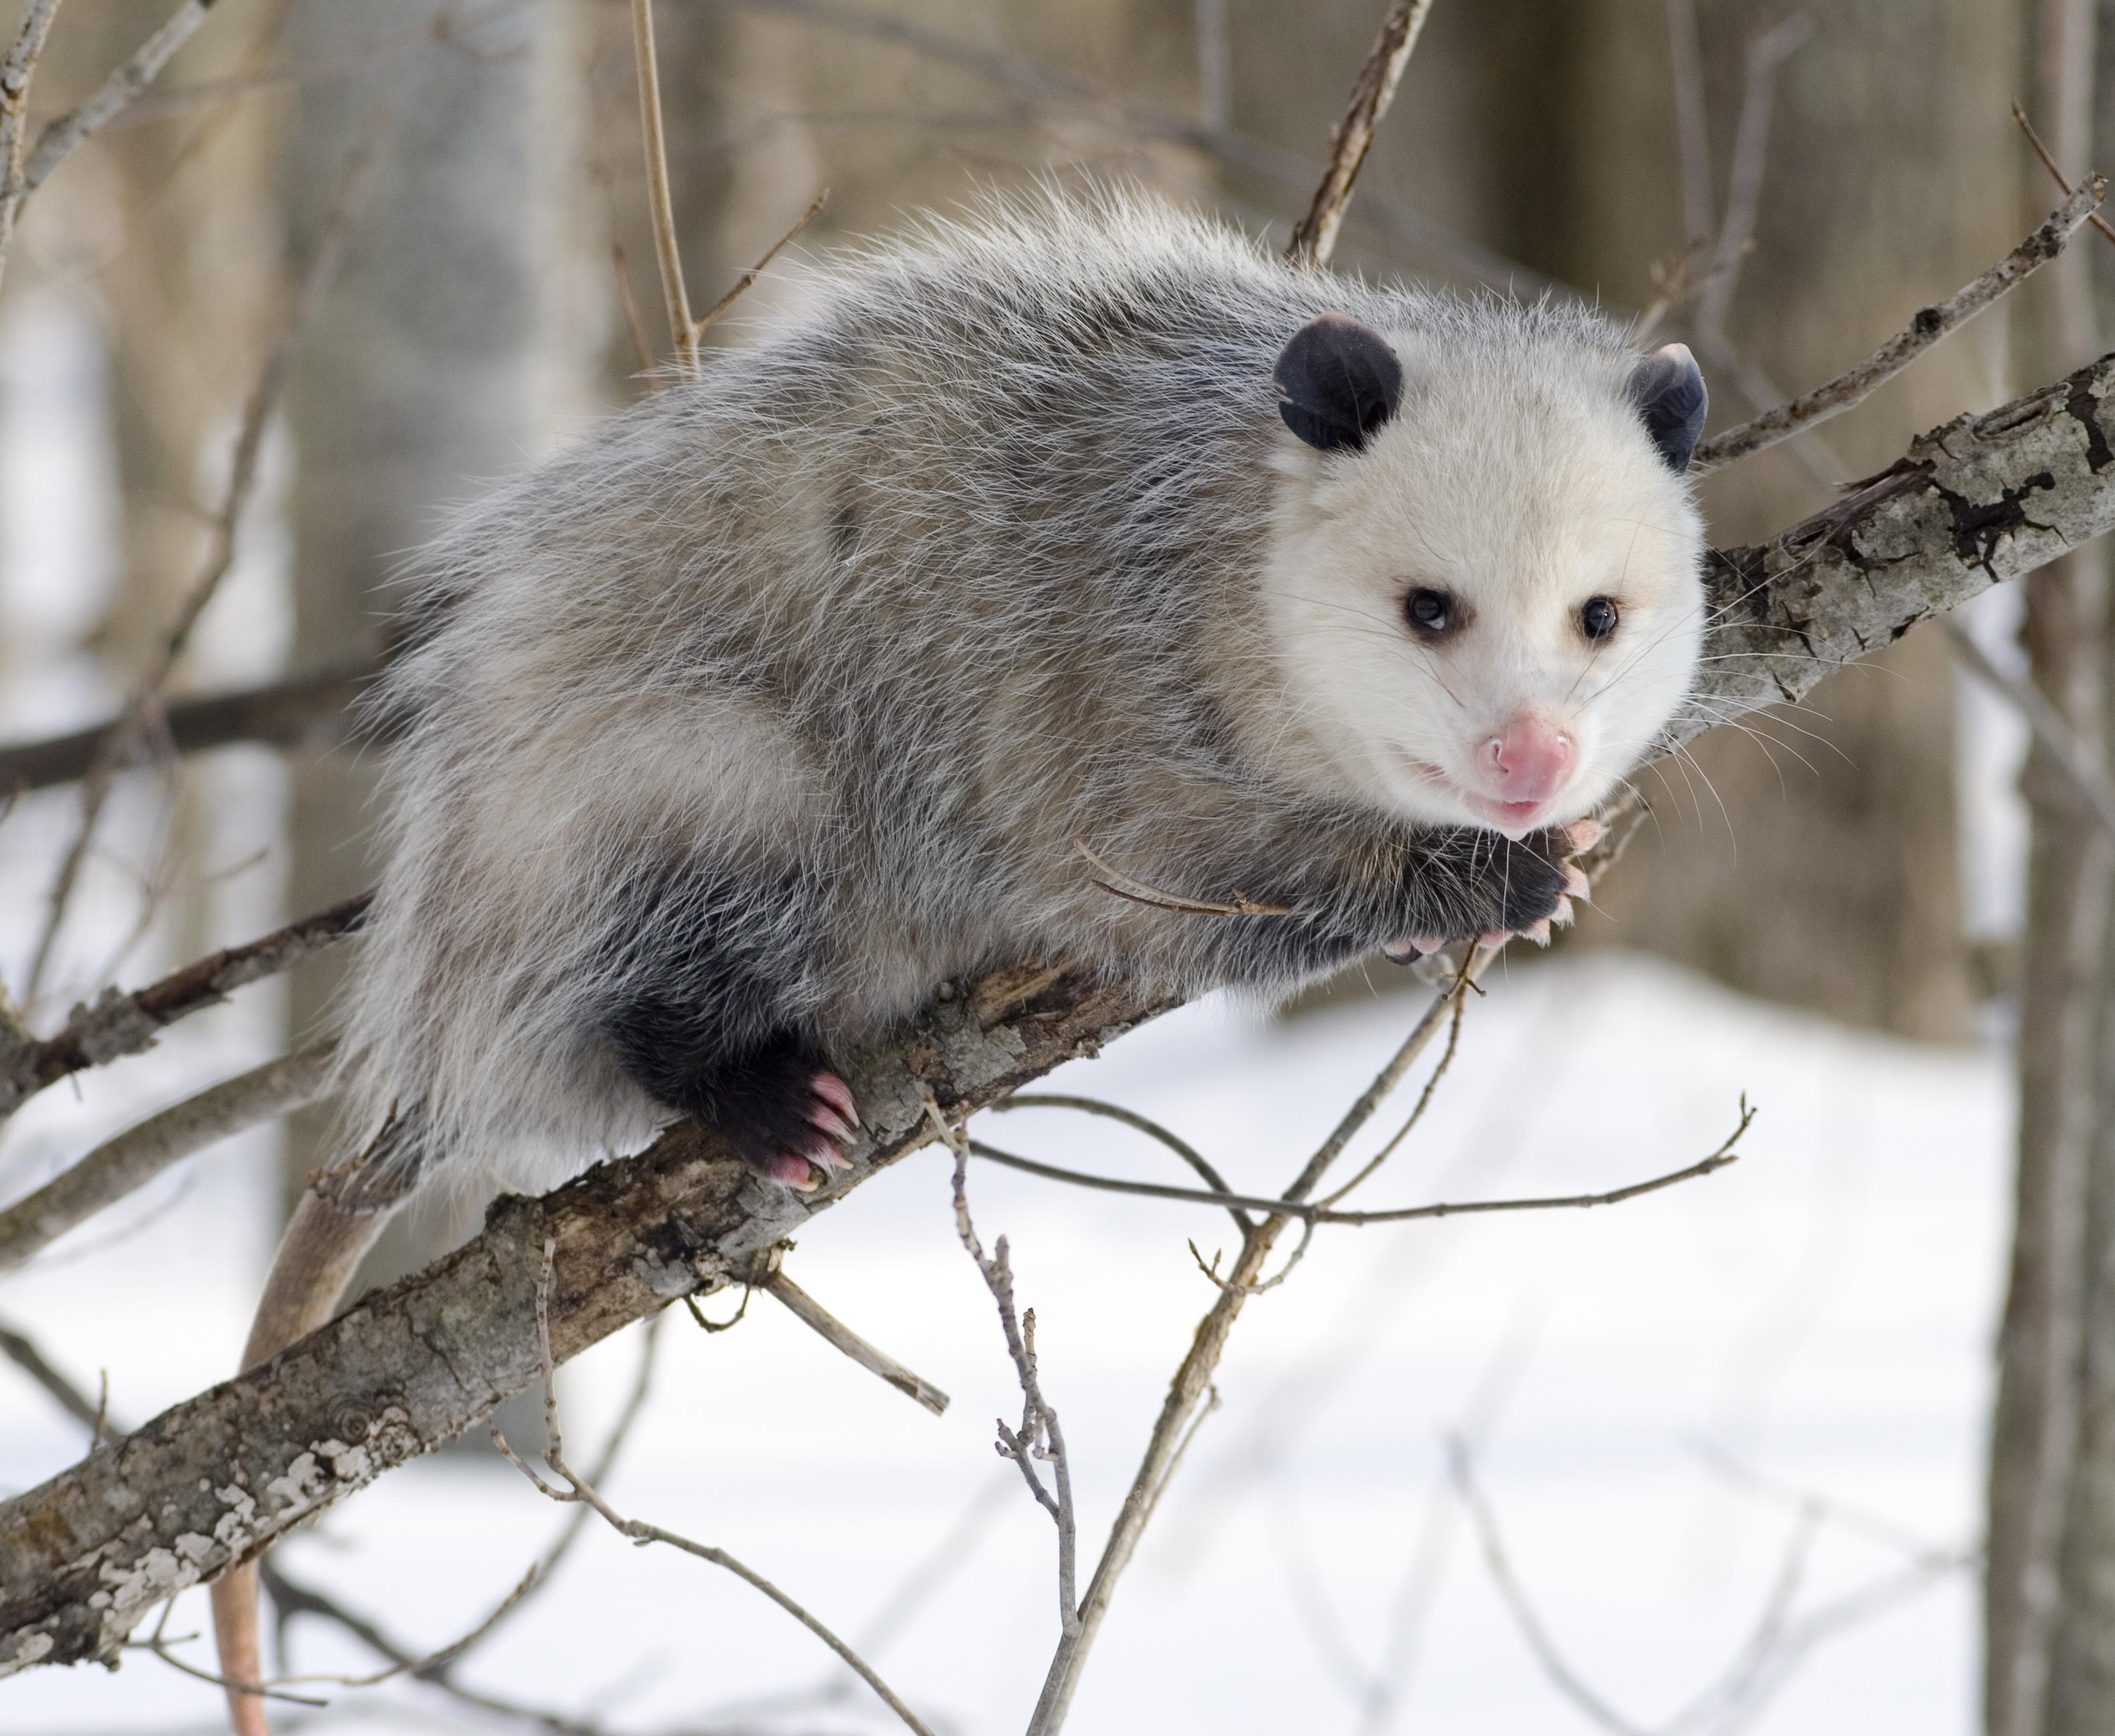 opossums are very good at climbing